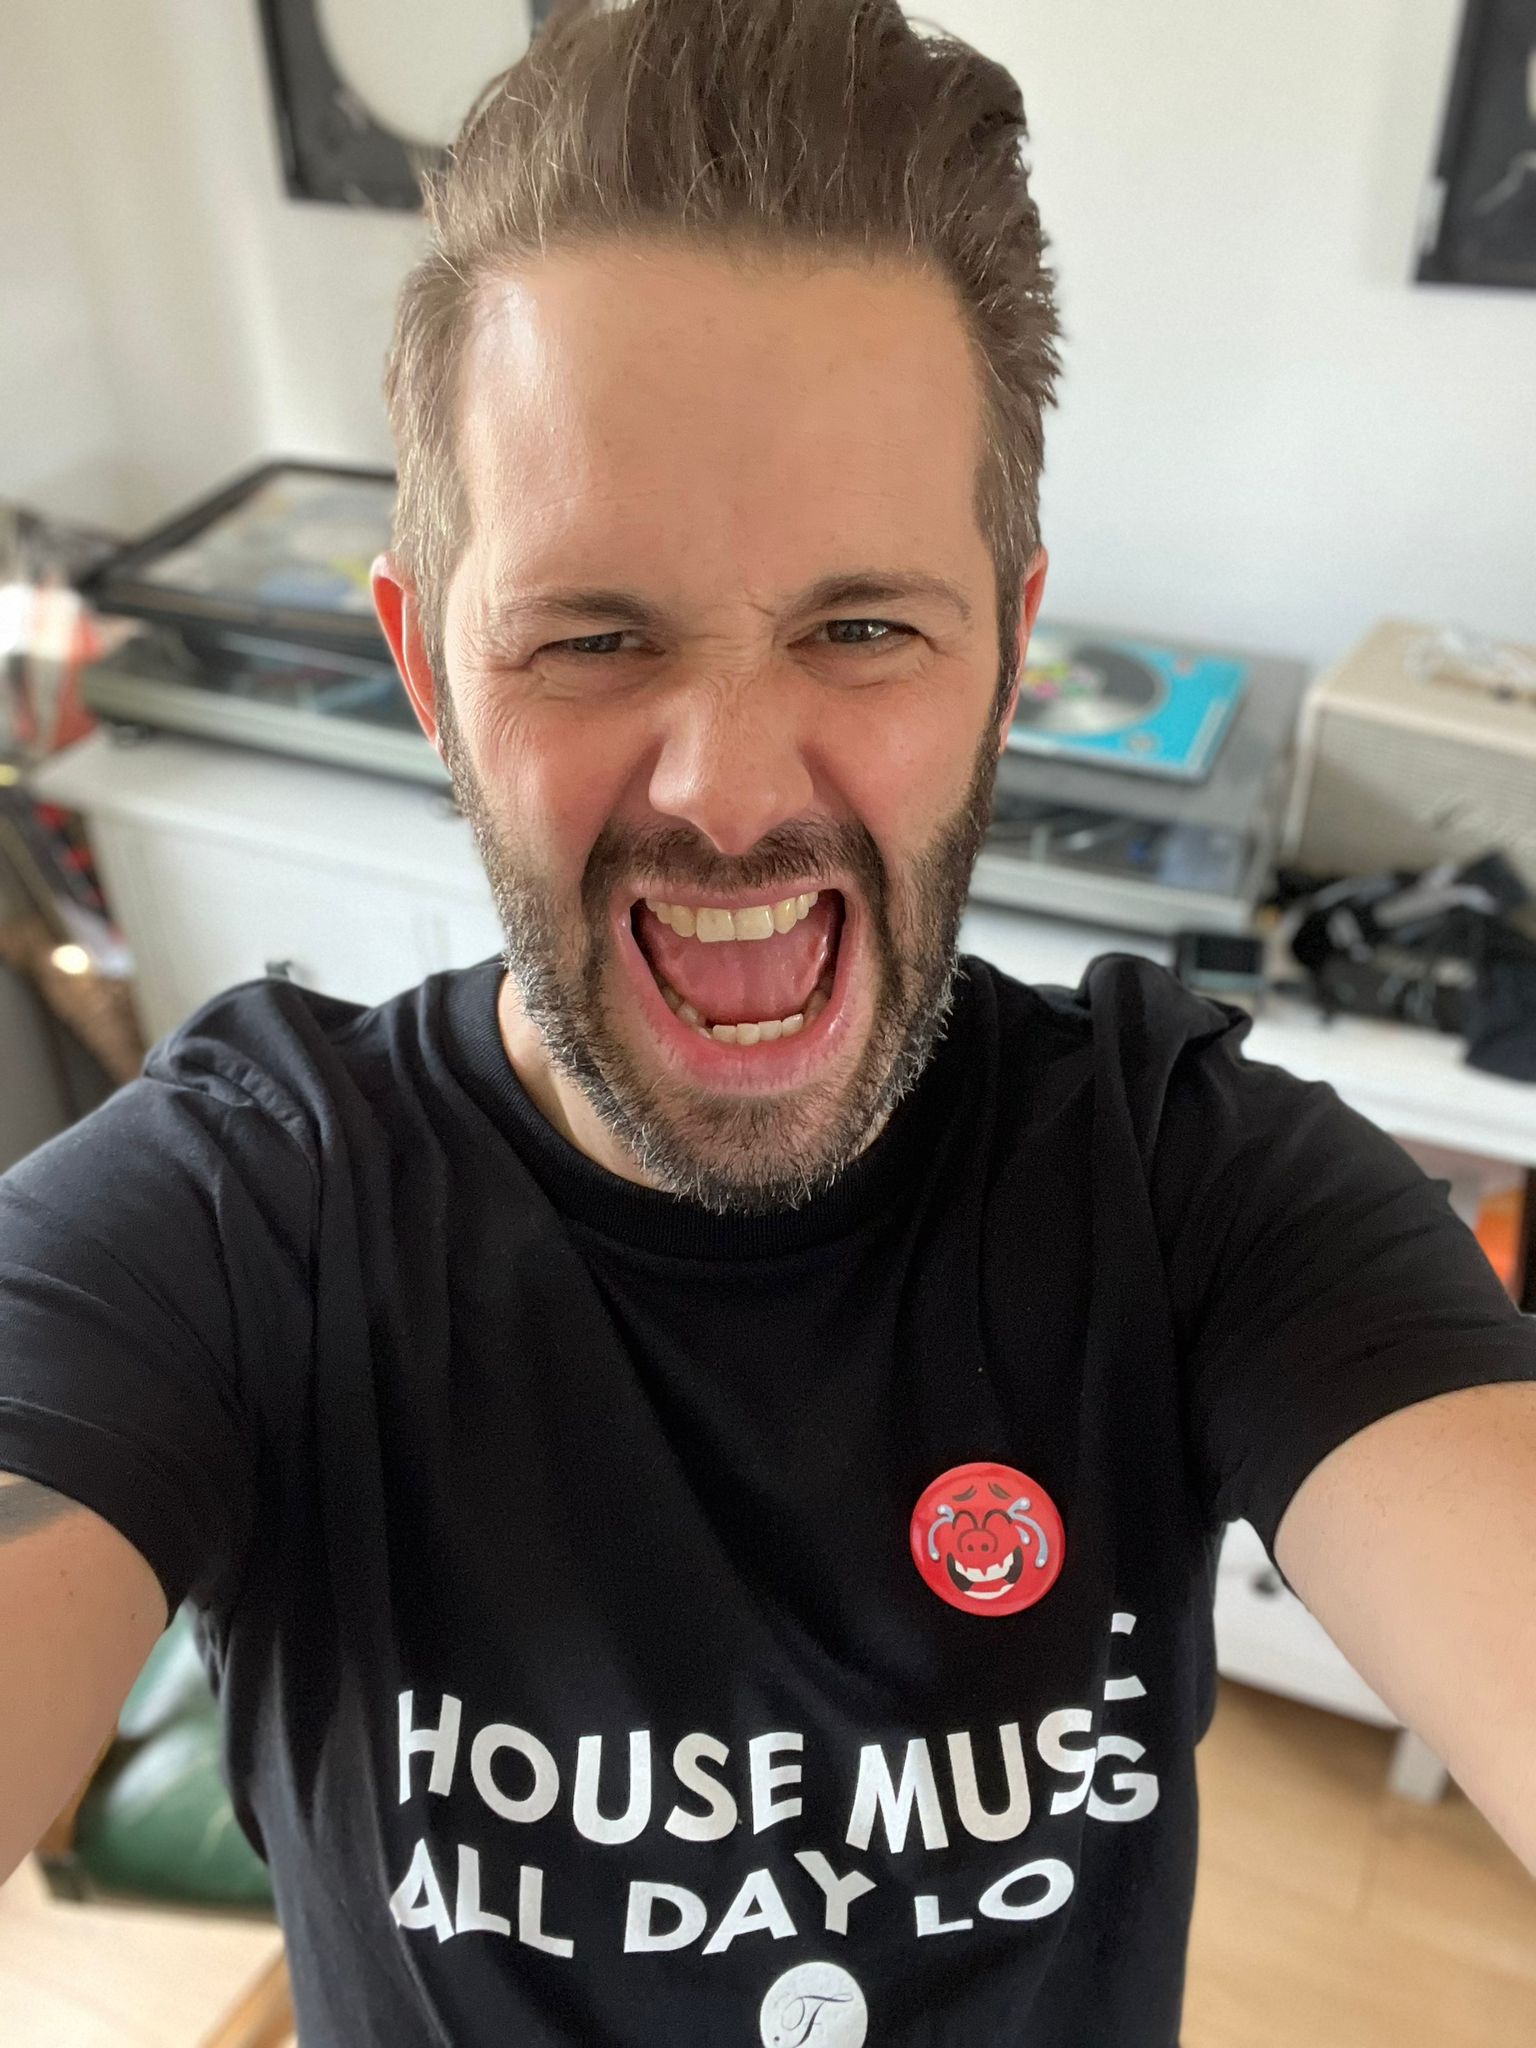 One Phat DJ modelling our House Music All Day Long t-shirt